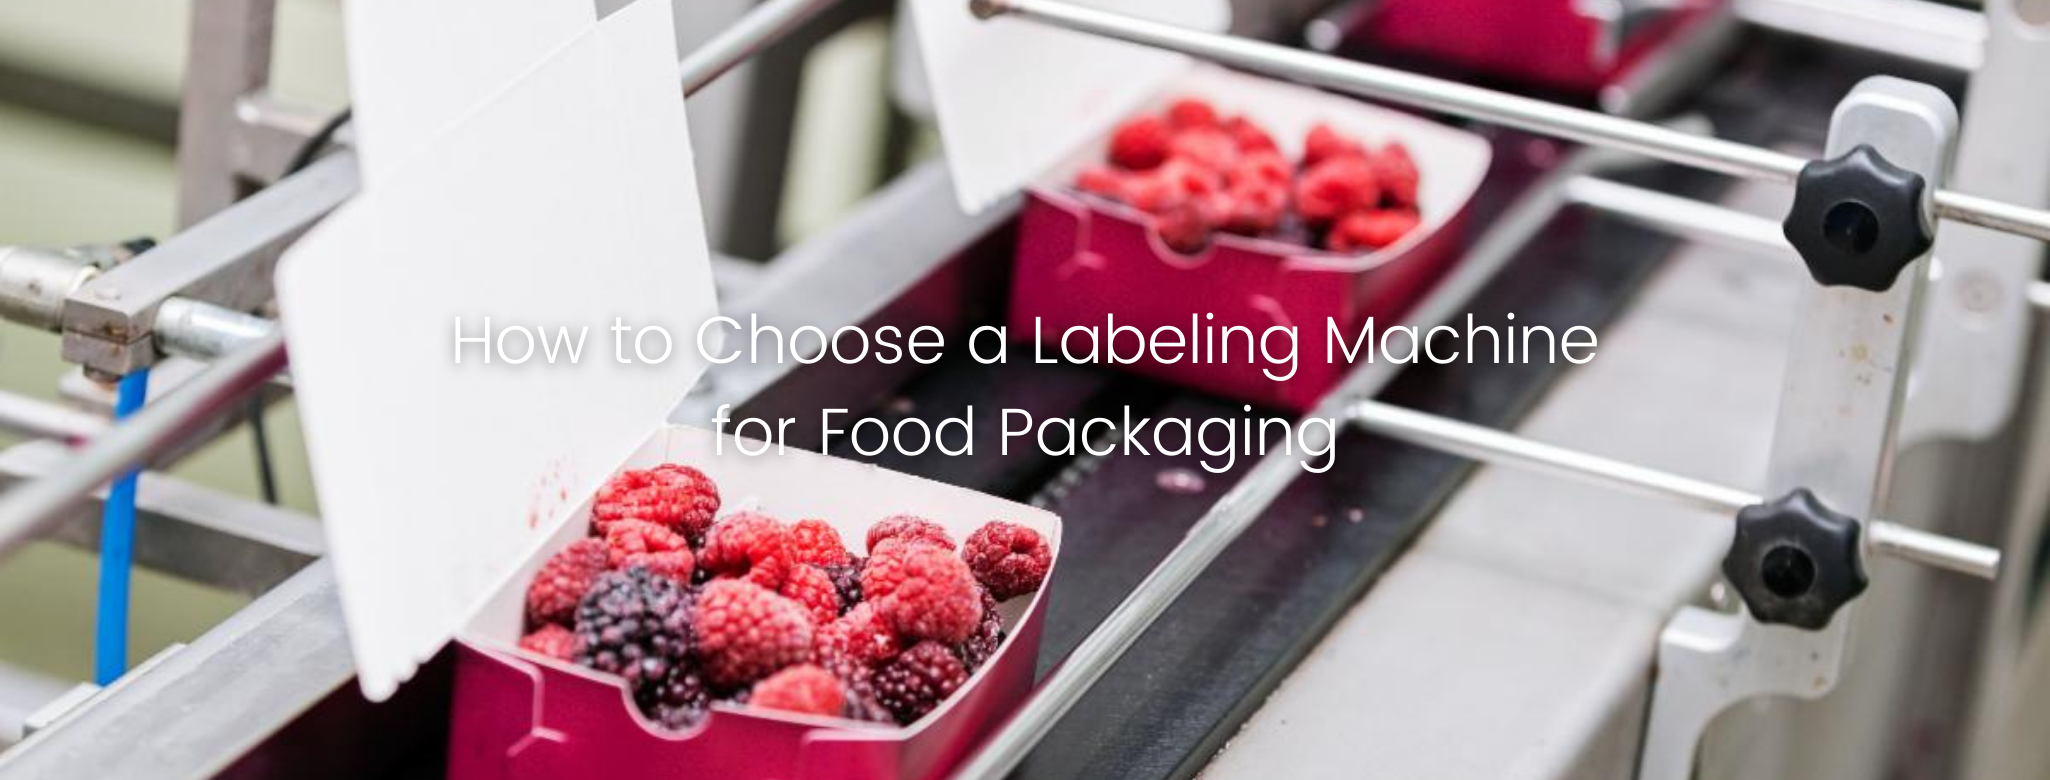 How to Choose a Labeling Machine for Food Packaging